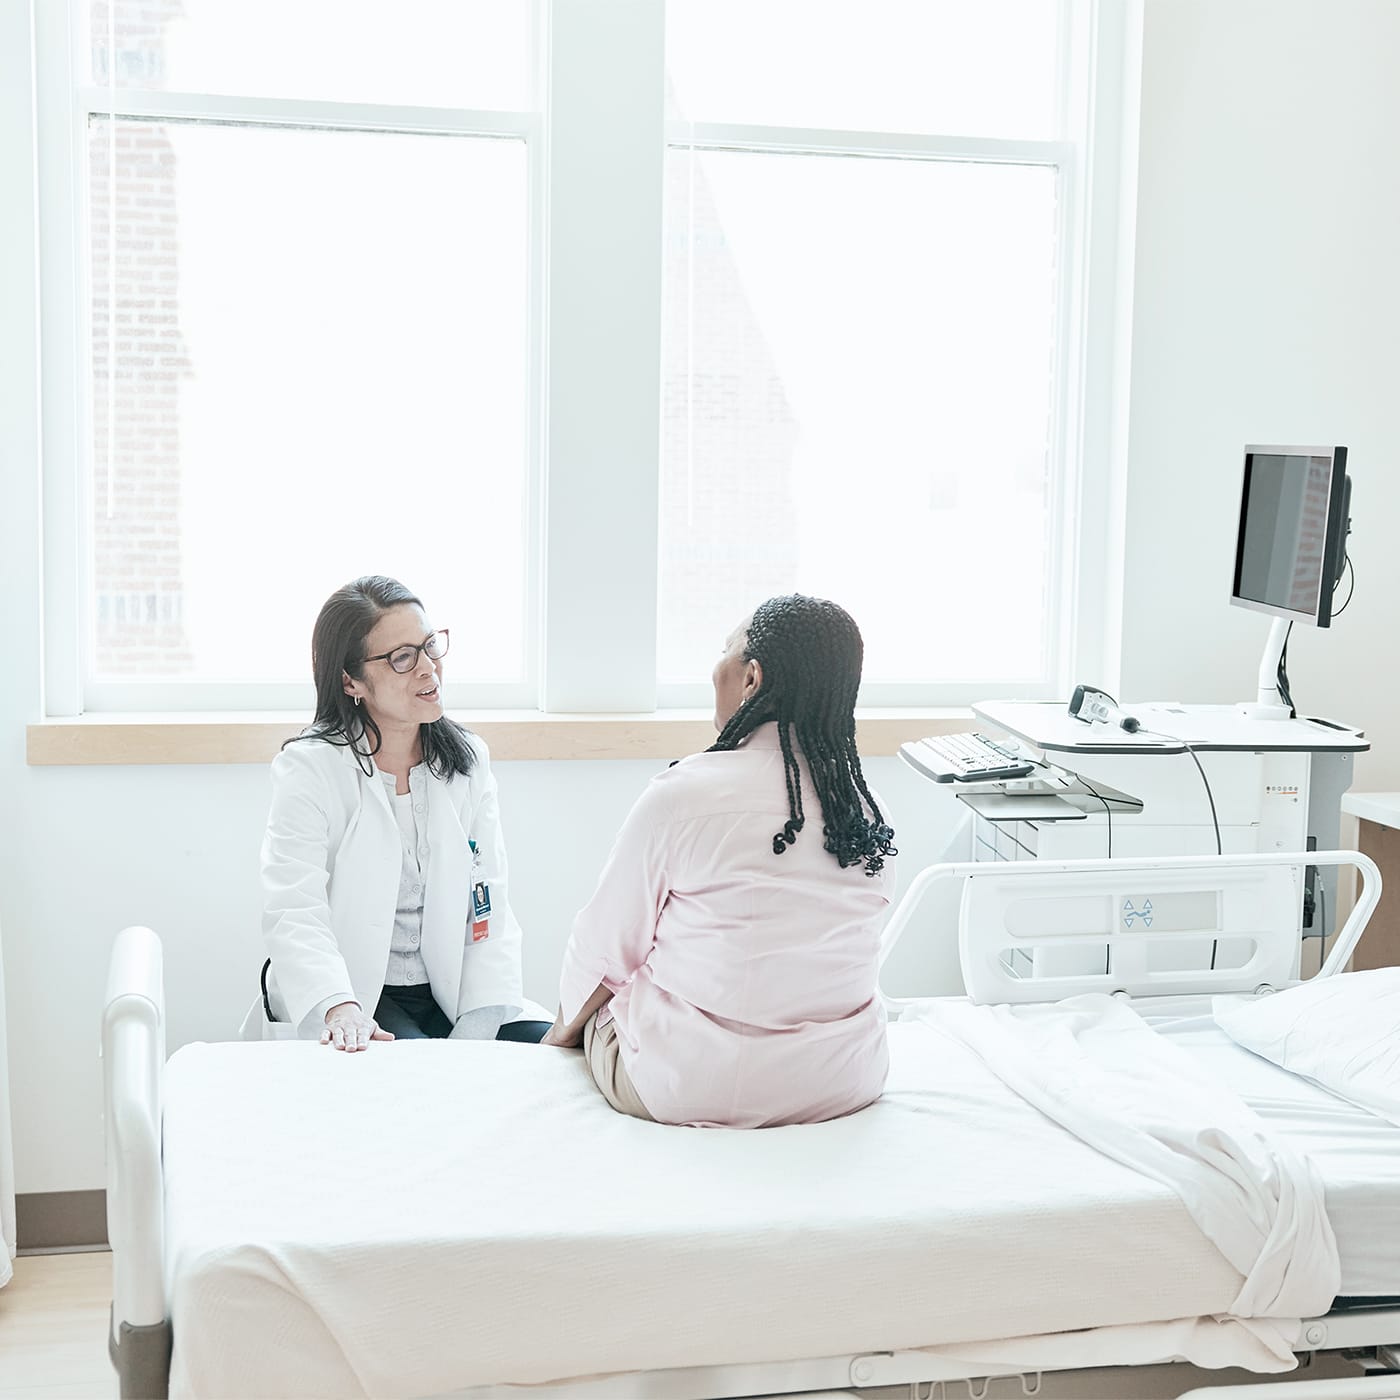 A patient and doctor having a bedside discussion in a hospital setting